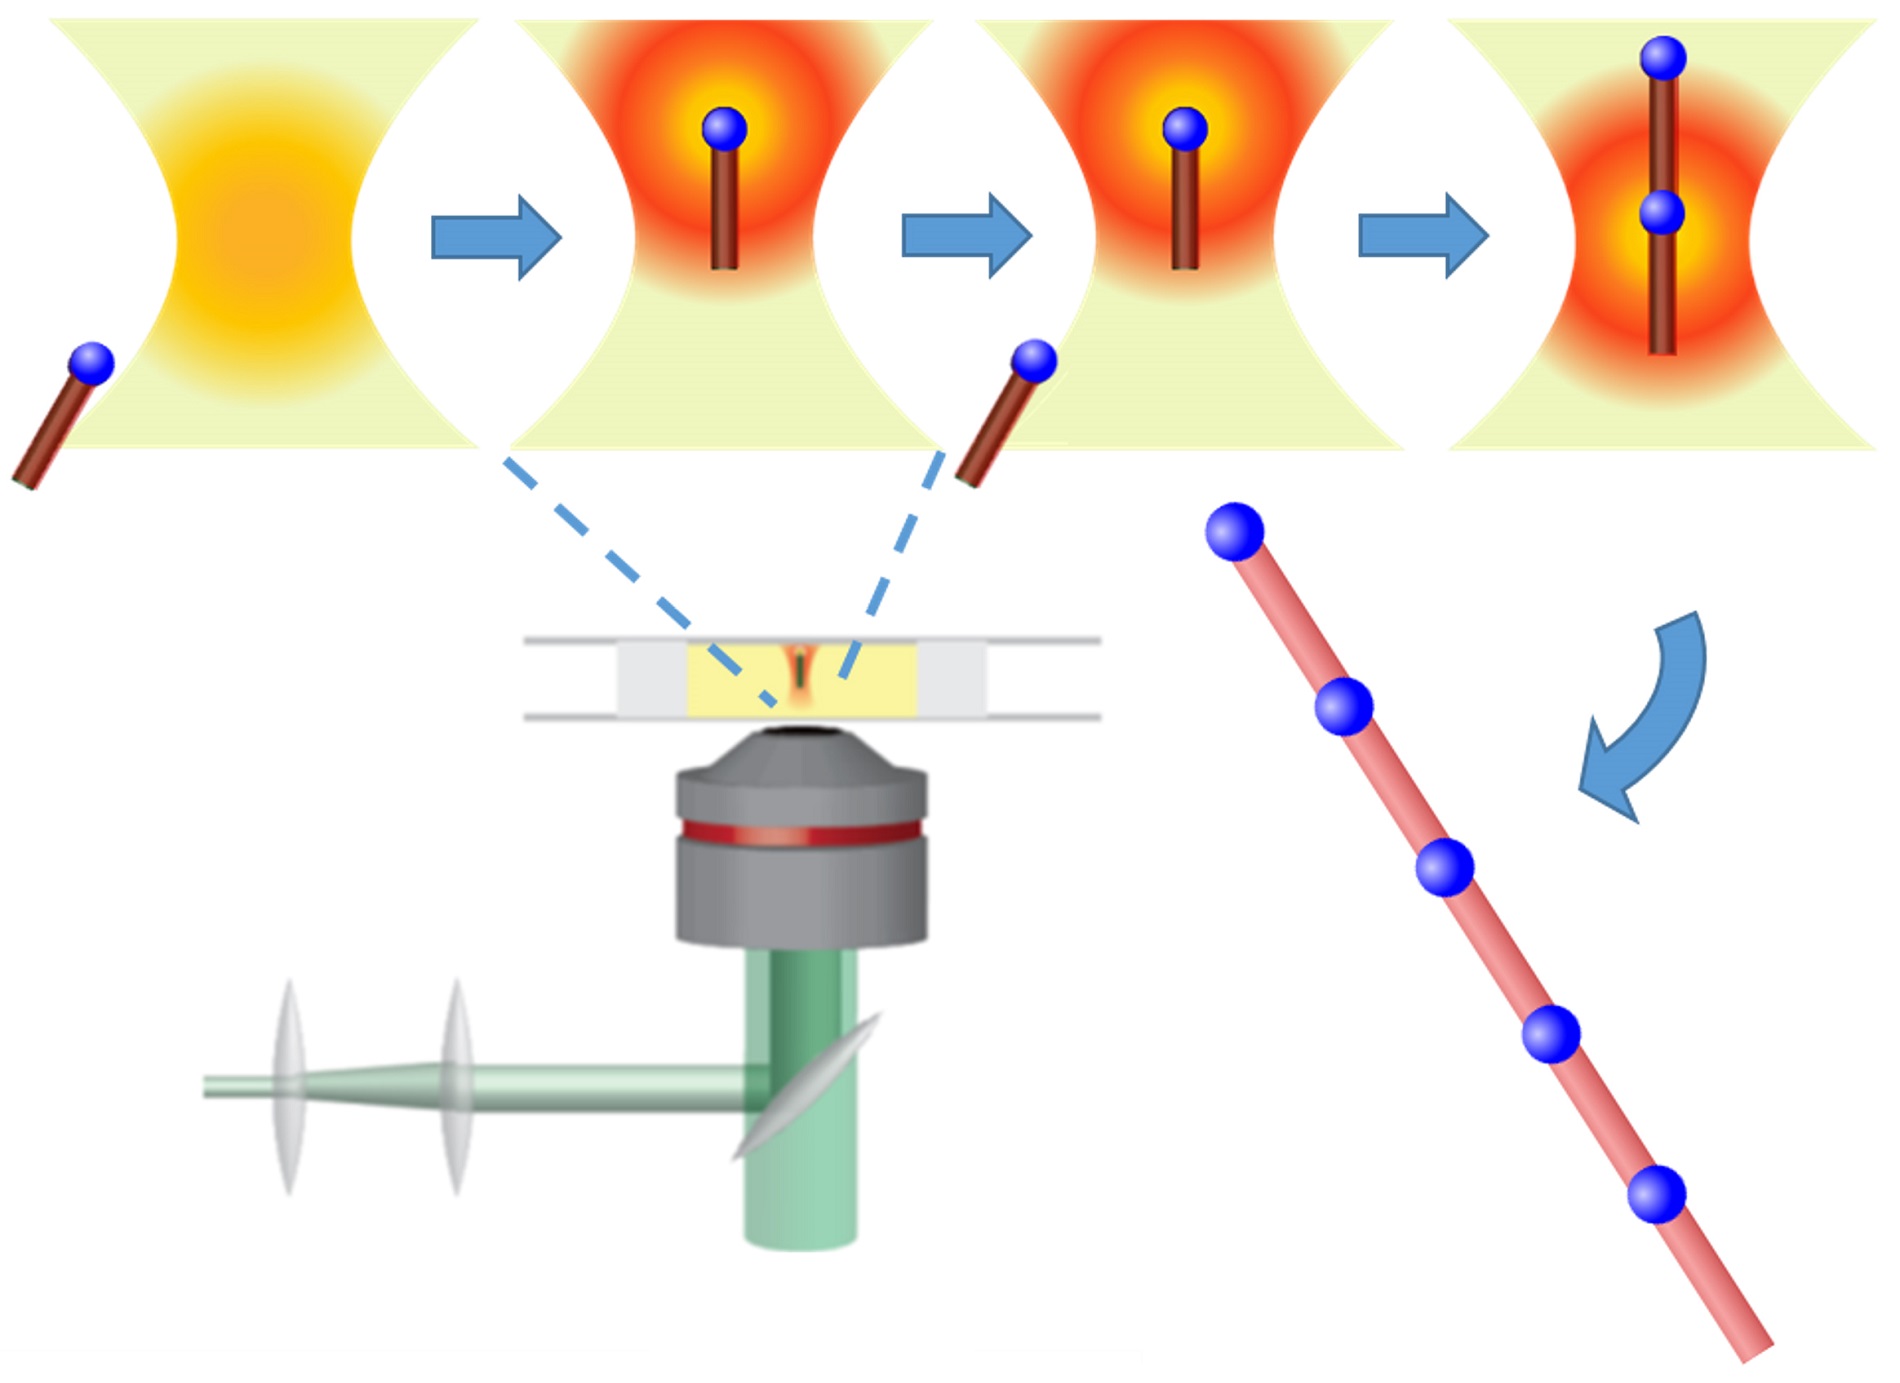 Focused laser light generates an optical tractor beam, which can manipulate and orient semiconductor nanorods with metal tips in an organic solvent solution